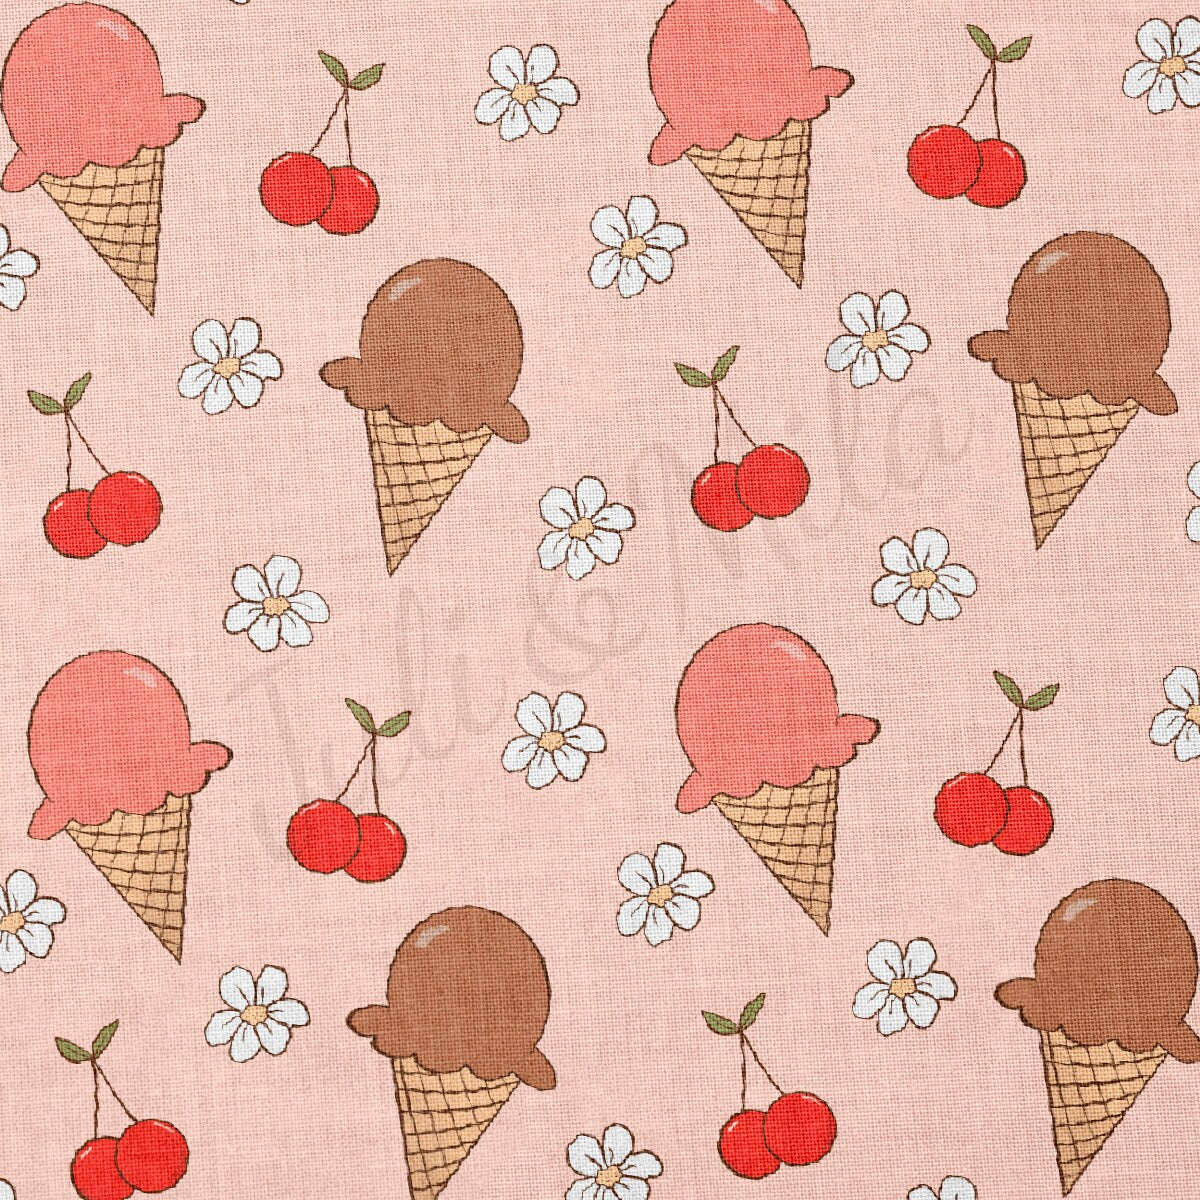 100% Cotton Fabric By the Yard Printed in USA Cotton Sateen -  Cotton CNT2035